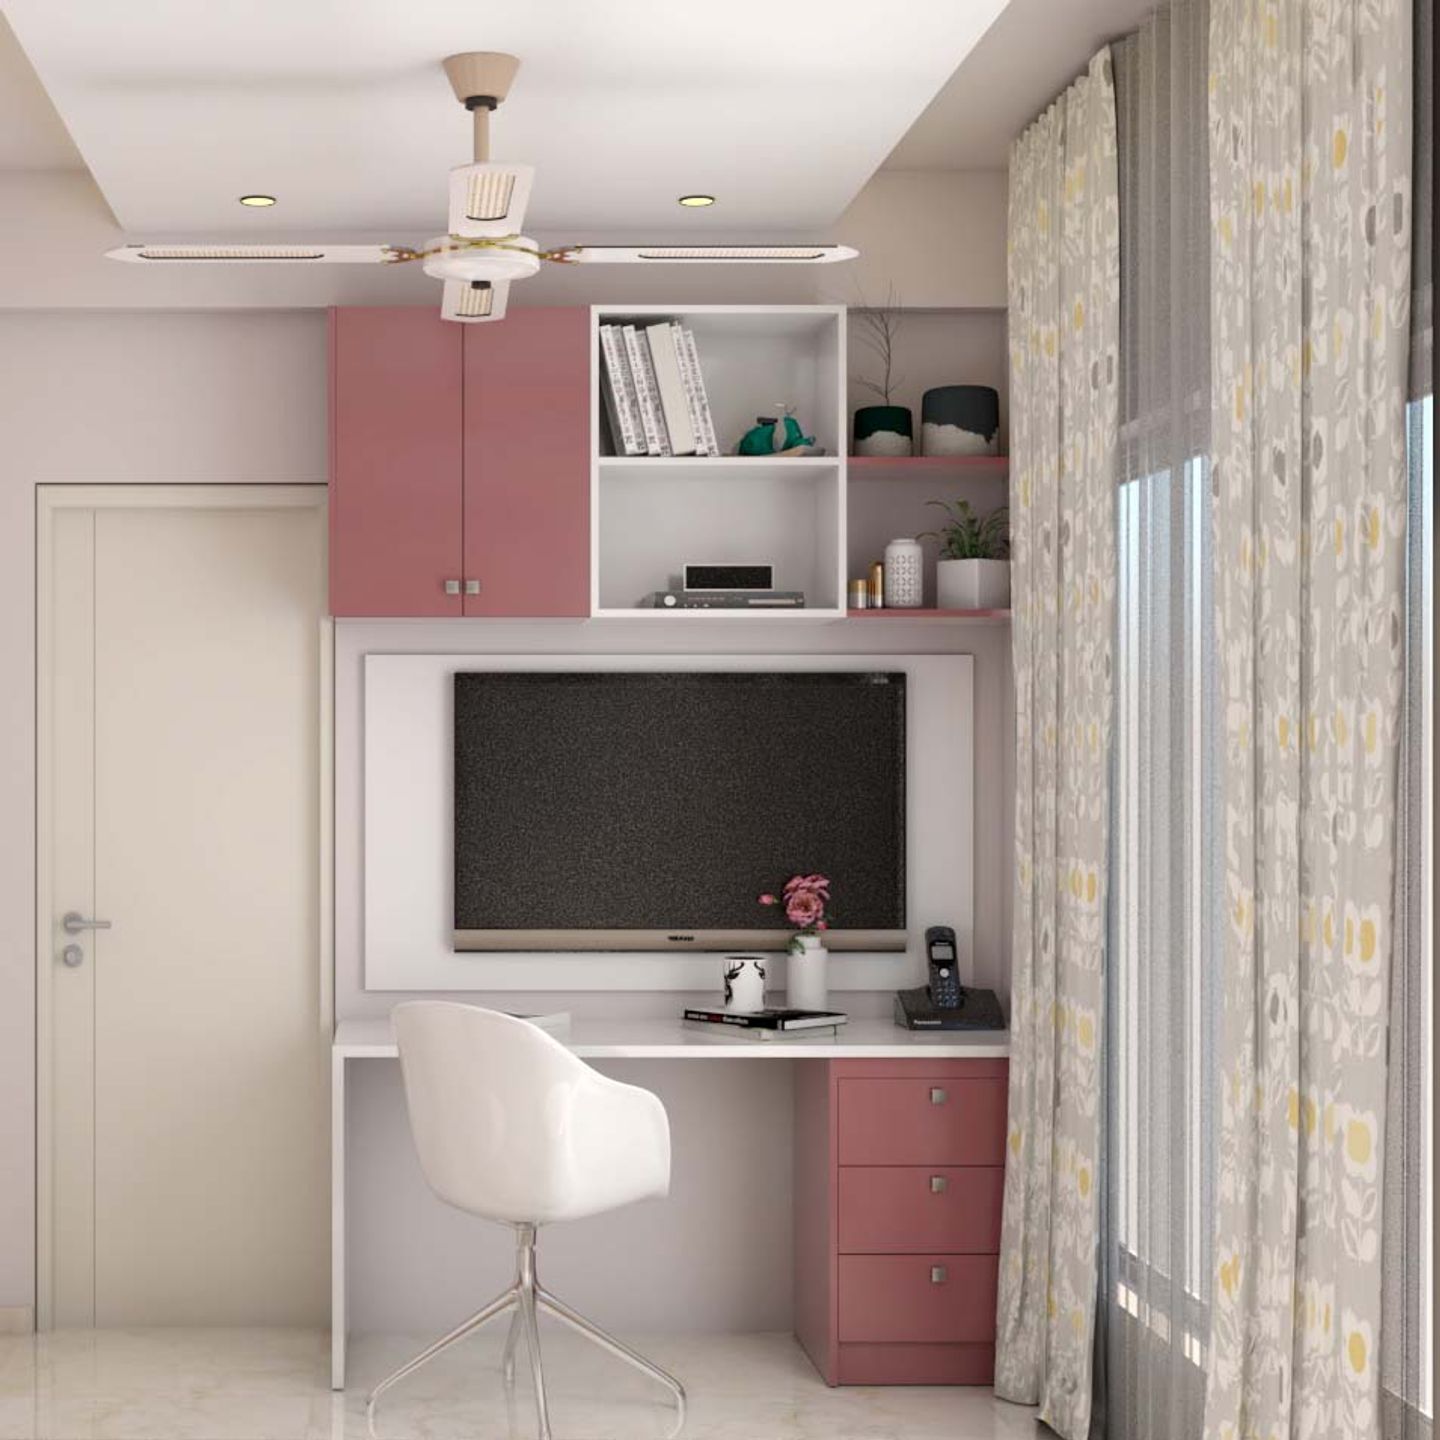 Study Room Design In White And Pink - Livspace